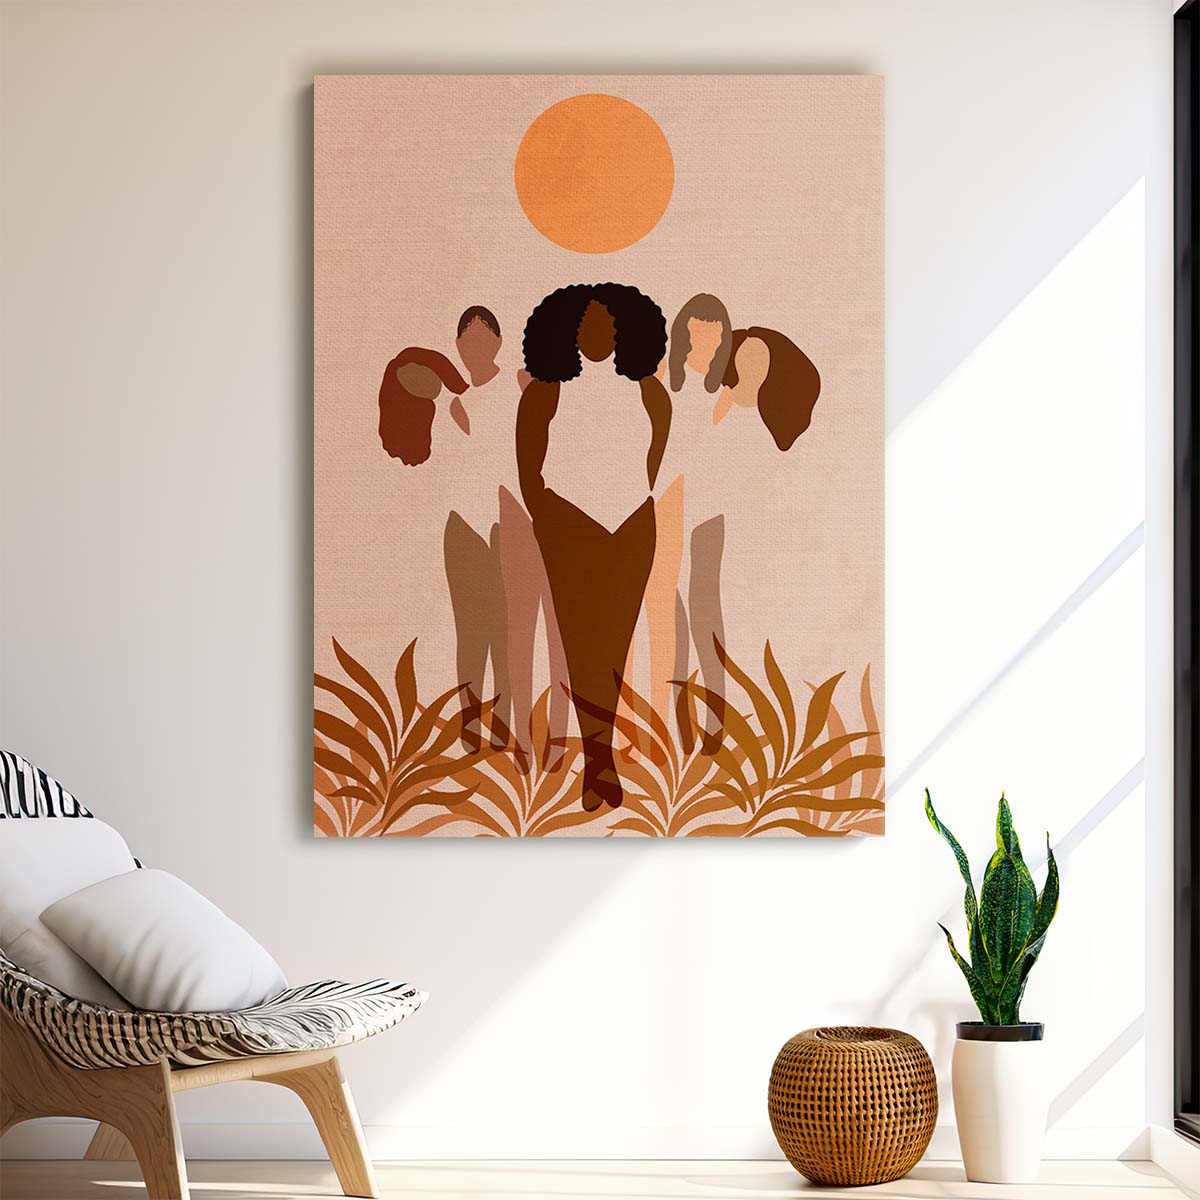 Empowered Colorful Boho Women Illustration with Botanicals by Luxuriance Designs, made in USA